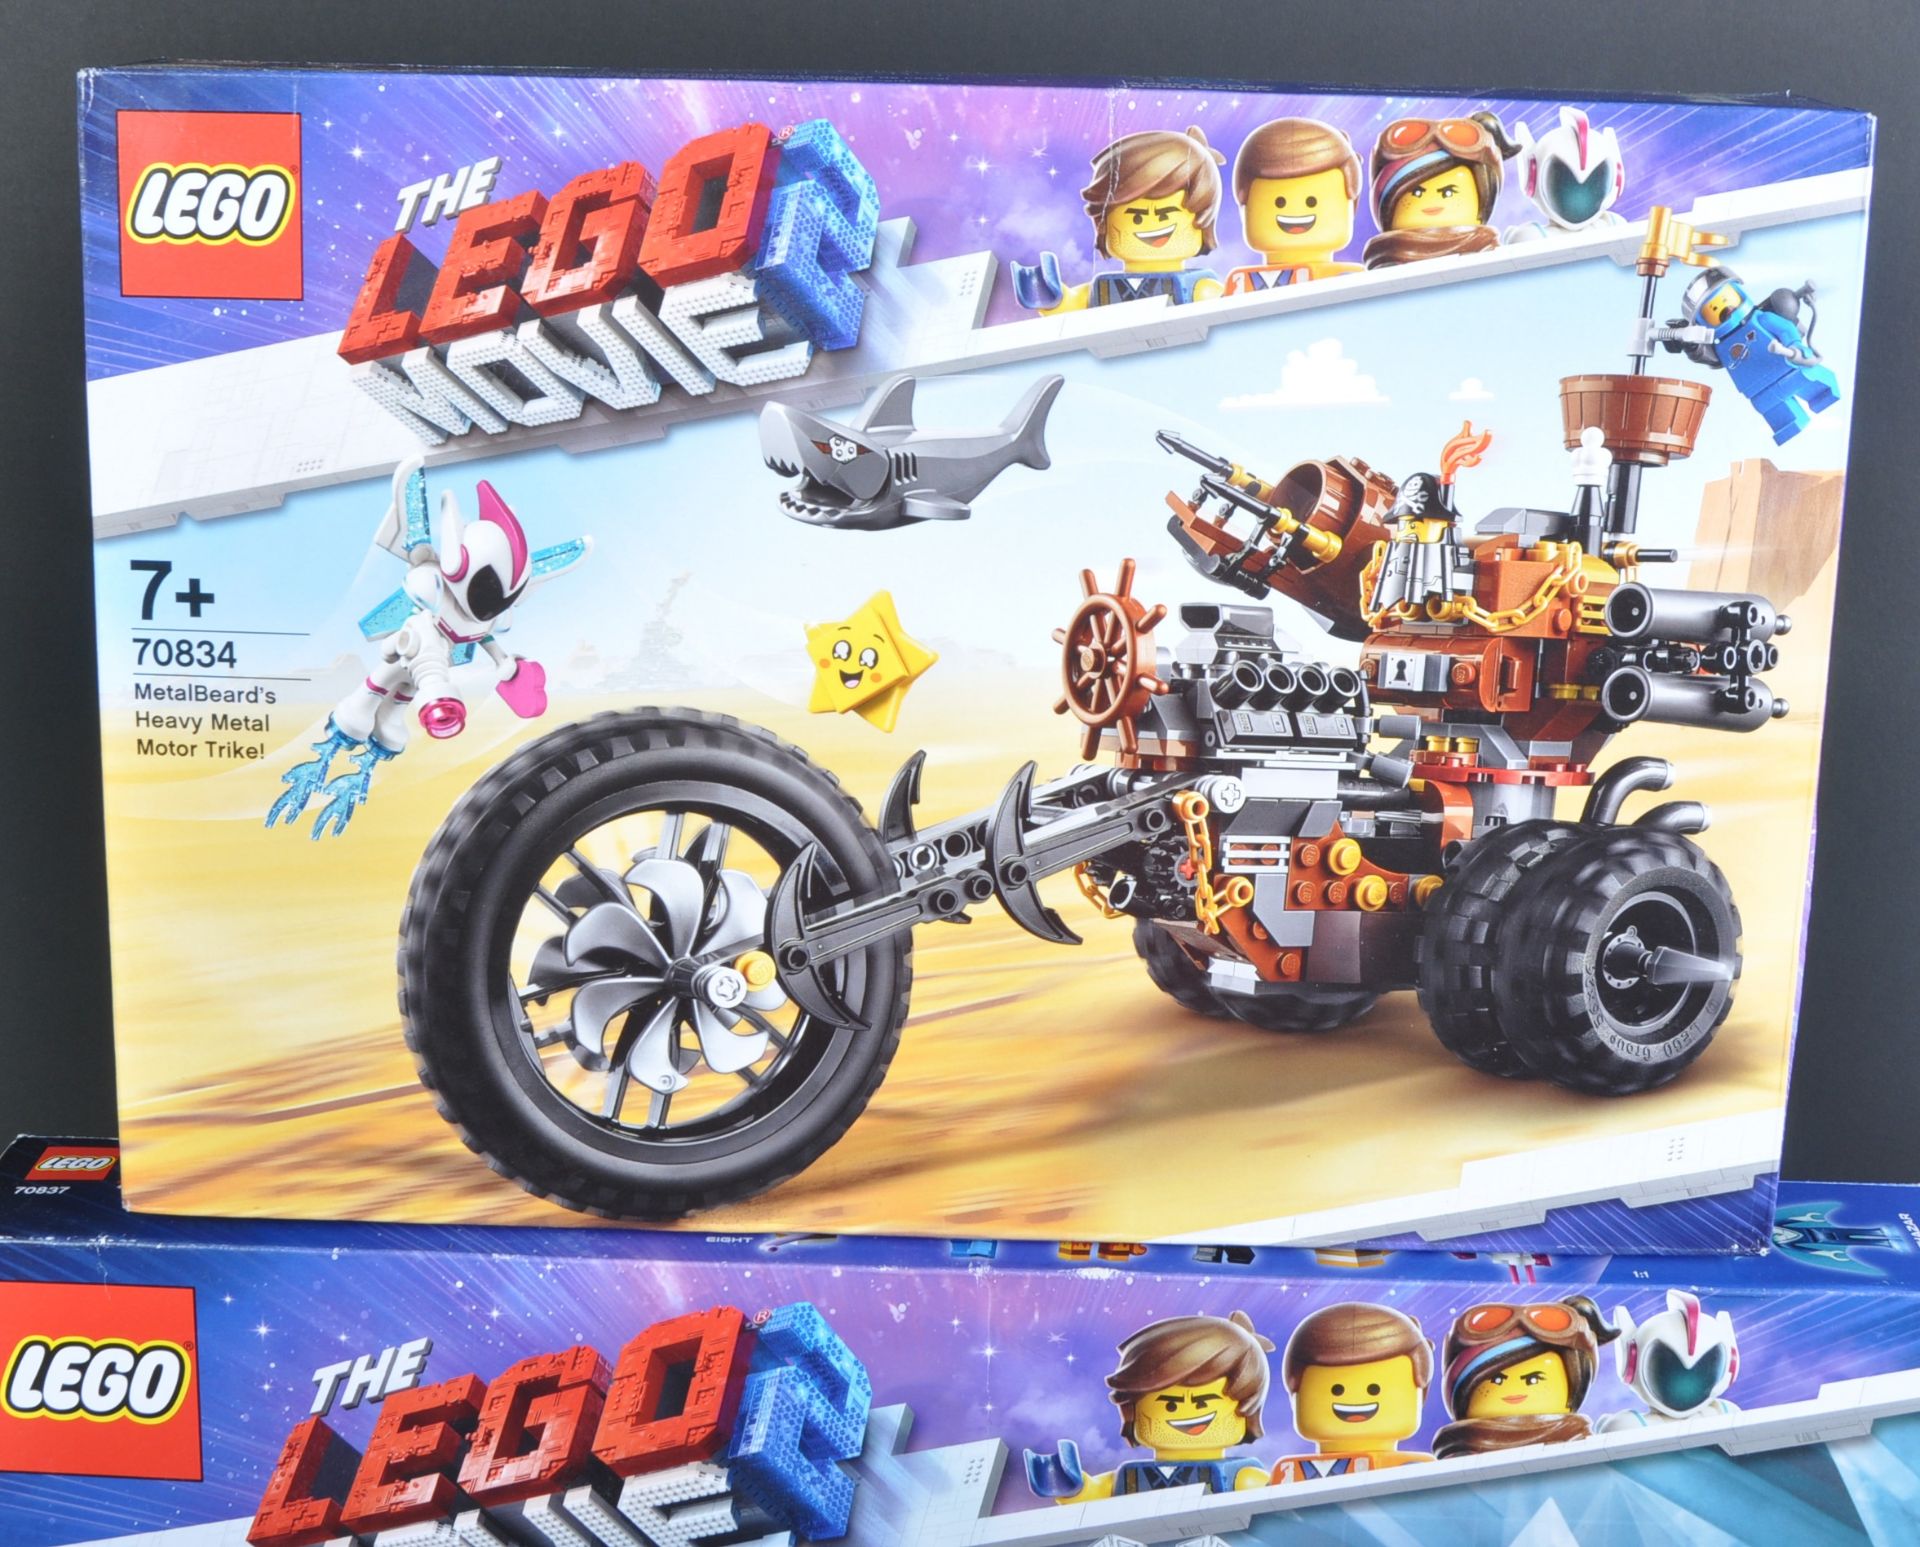 LEGO SETS - TWO THE LEGO MOVIE SETS - 70837 & 70834 - Image 2 of 5